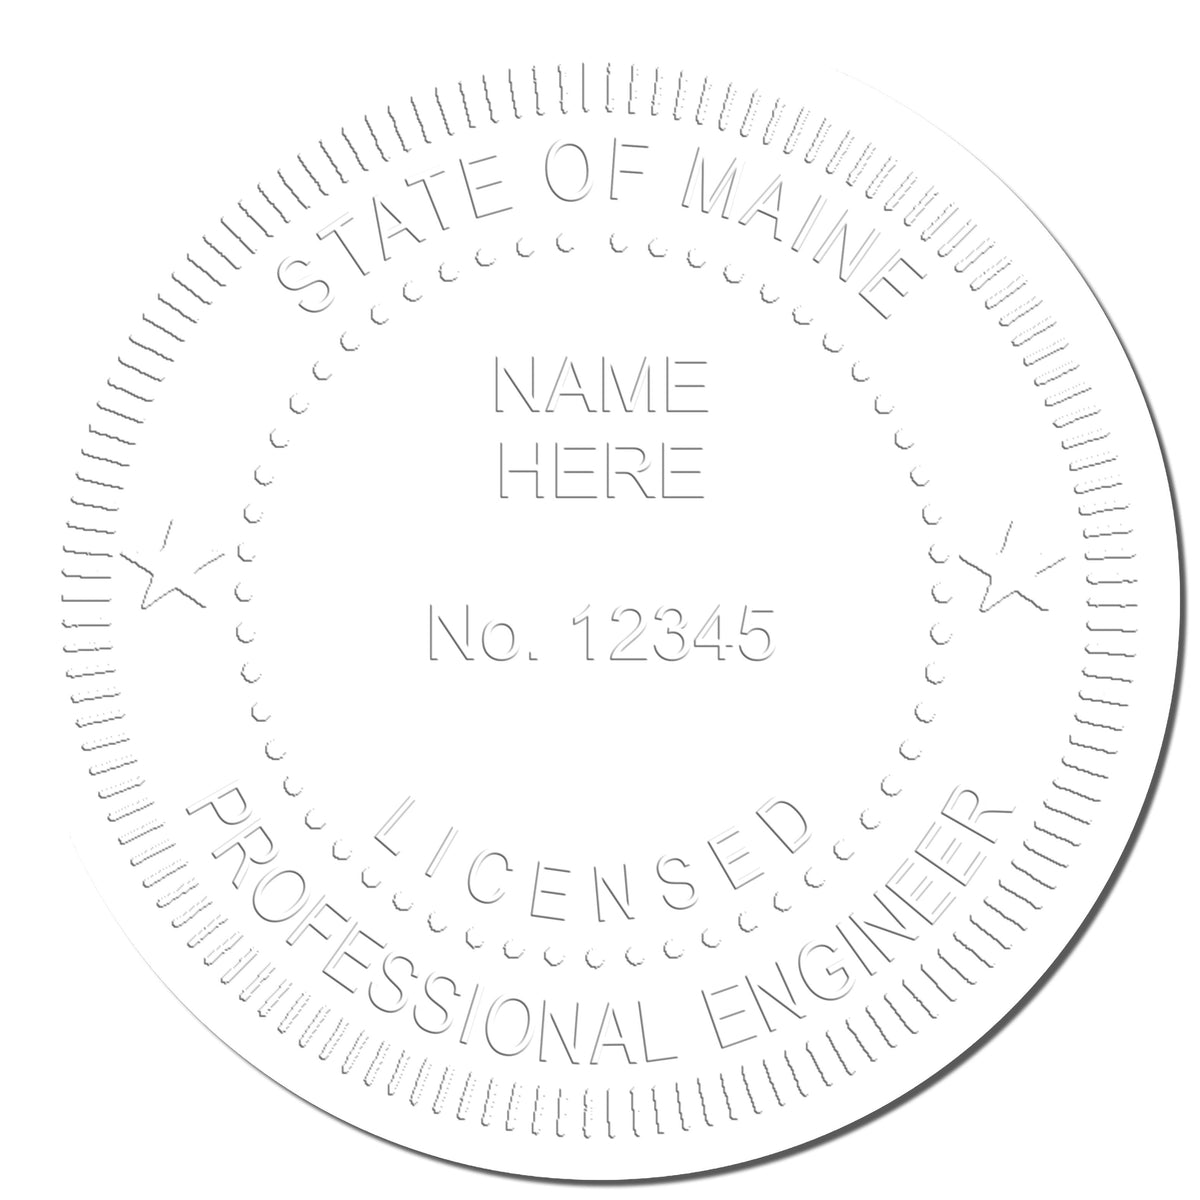 This paper is stamped with a sample imprint of the State of Maine Extended Long Reach Engineer Seal, signifying its quality and reliability.